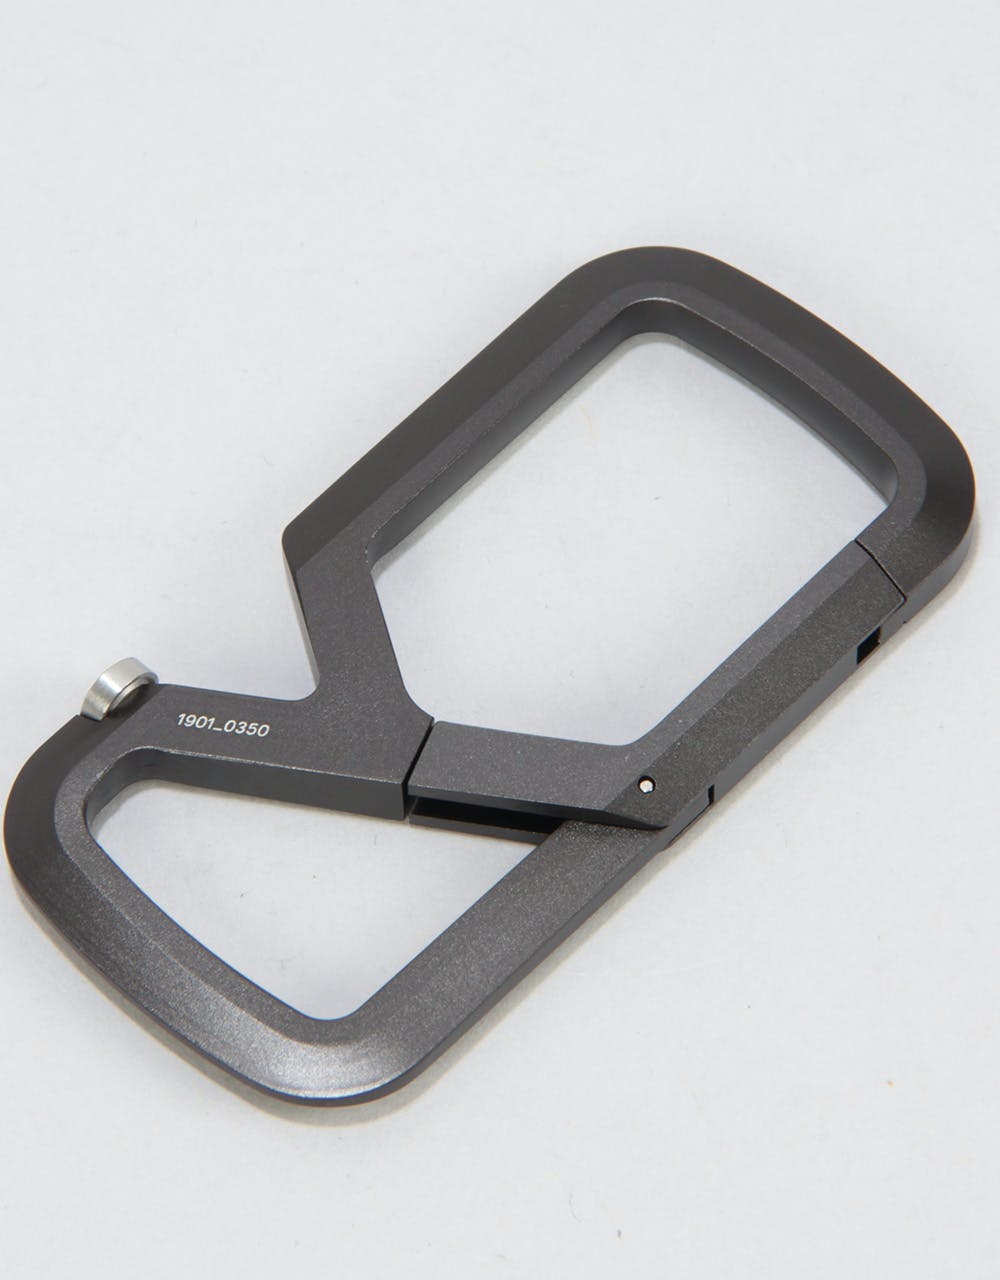 James The Mehlville 'Carabiner' Keychain - Space Grey/Stainless